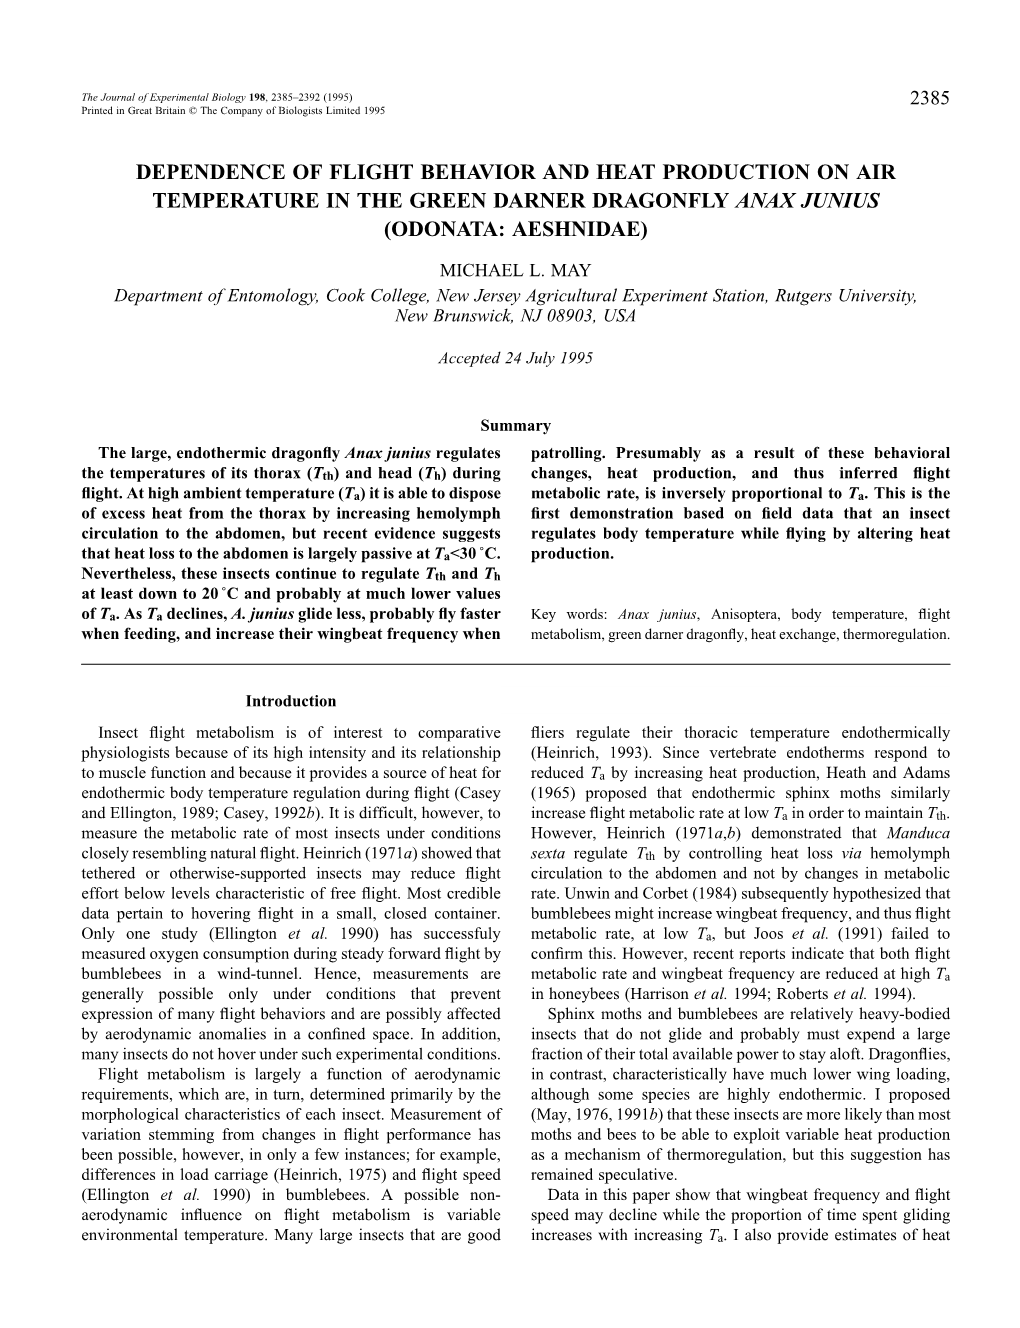 Dependence of Flight Behavior and Heat Production on Air Temperature in the Green Darner Dragonfly Anax Junius (Odonata: Aeshnidae)